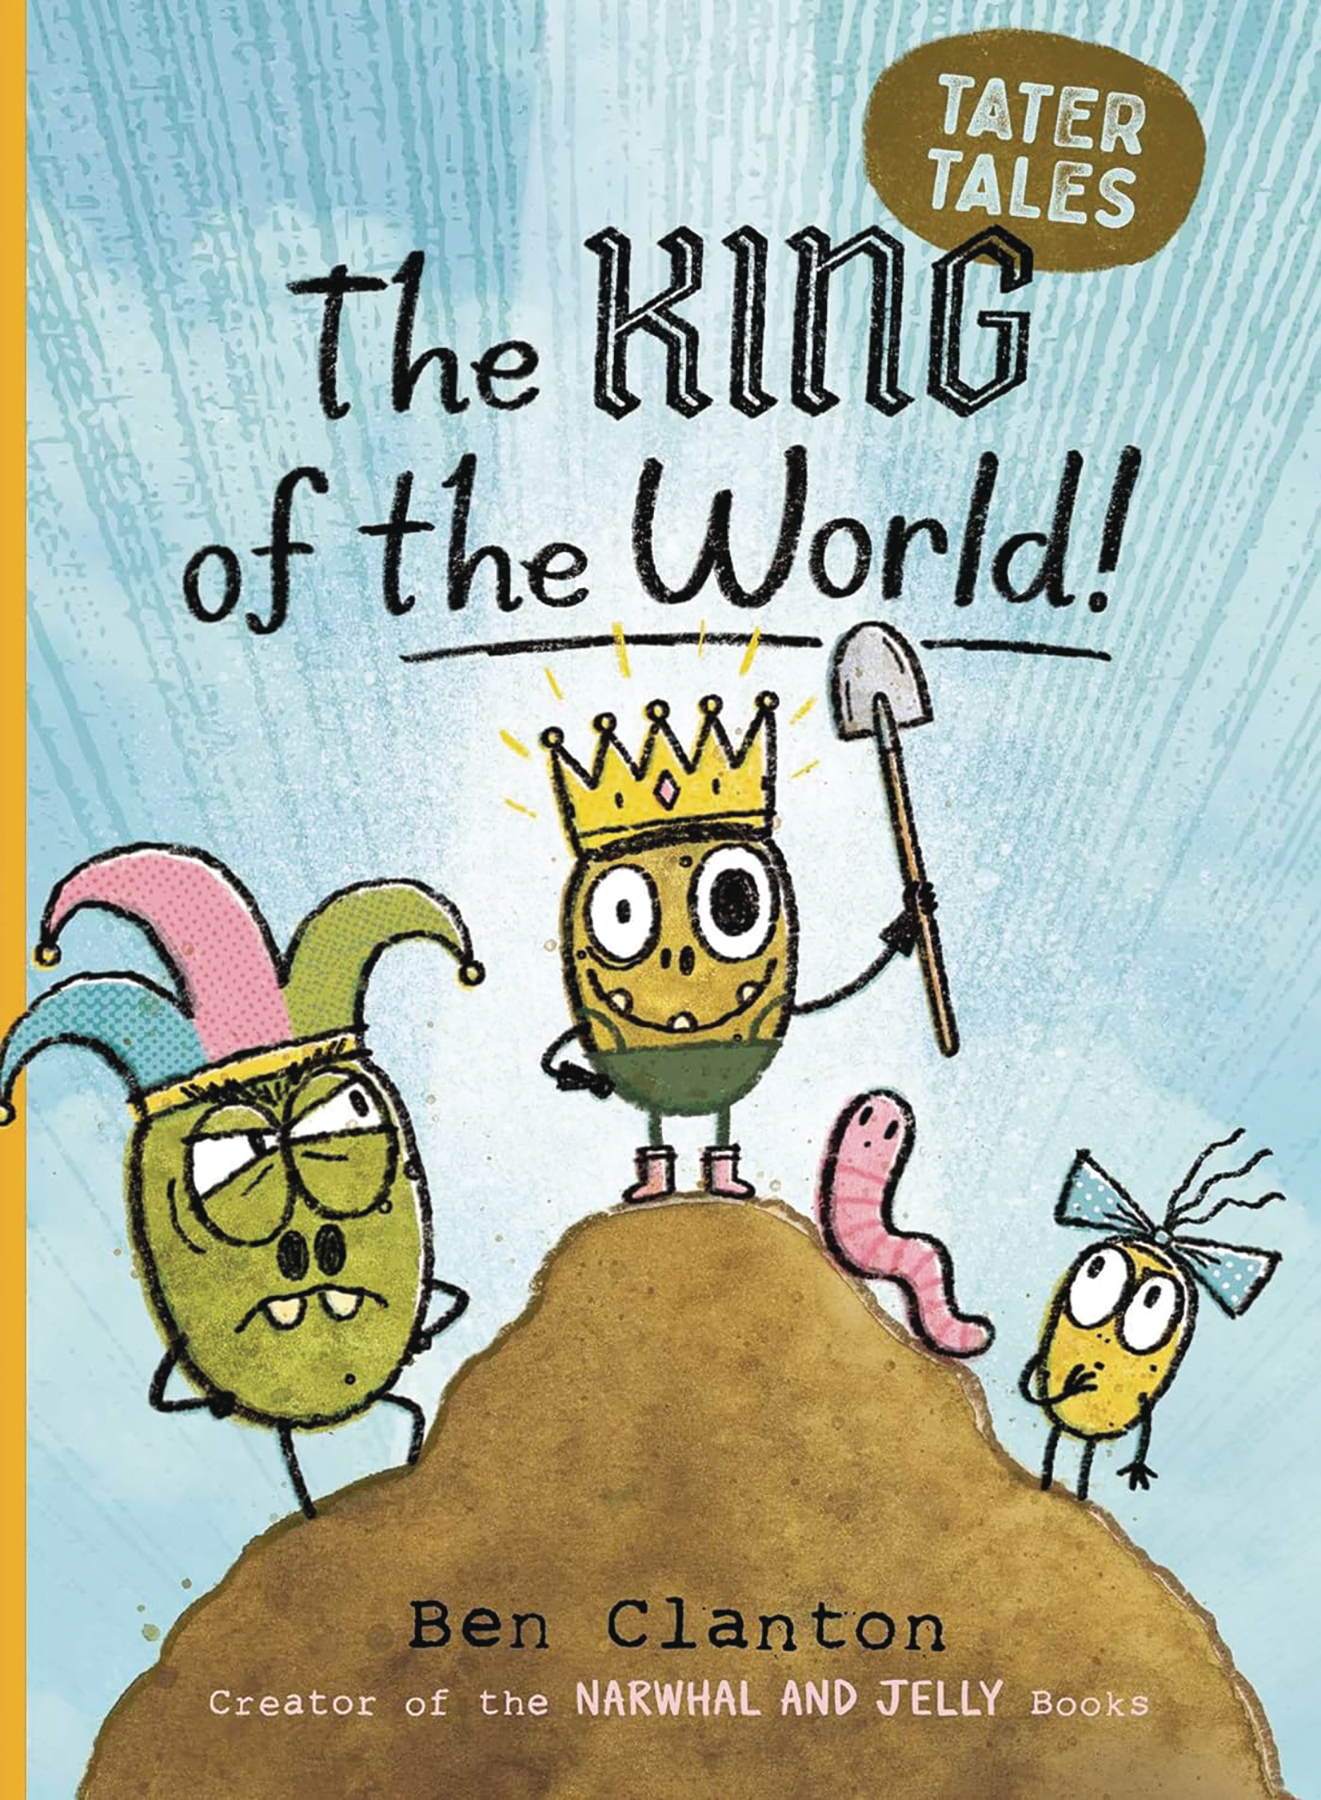 Tater Tales Graphic Novel King of the World